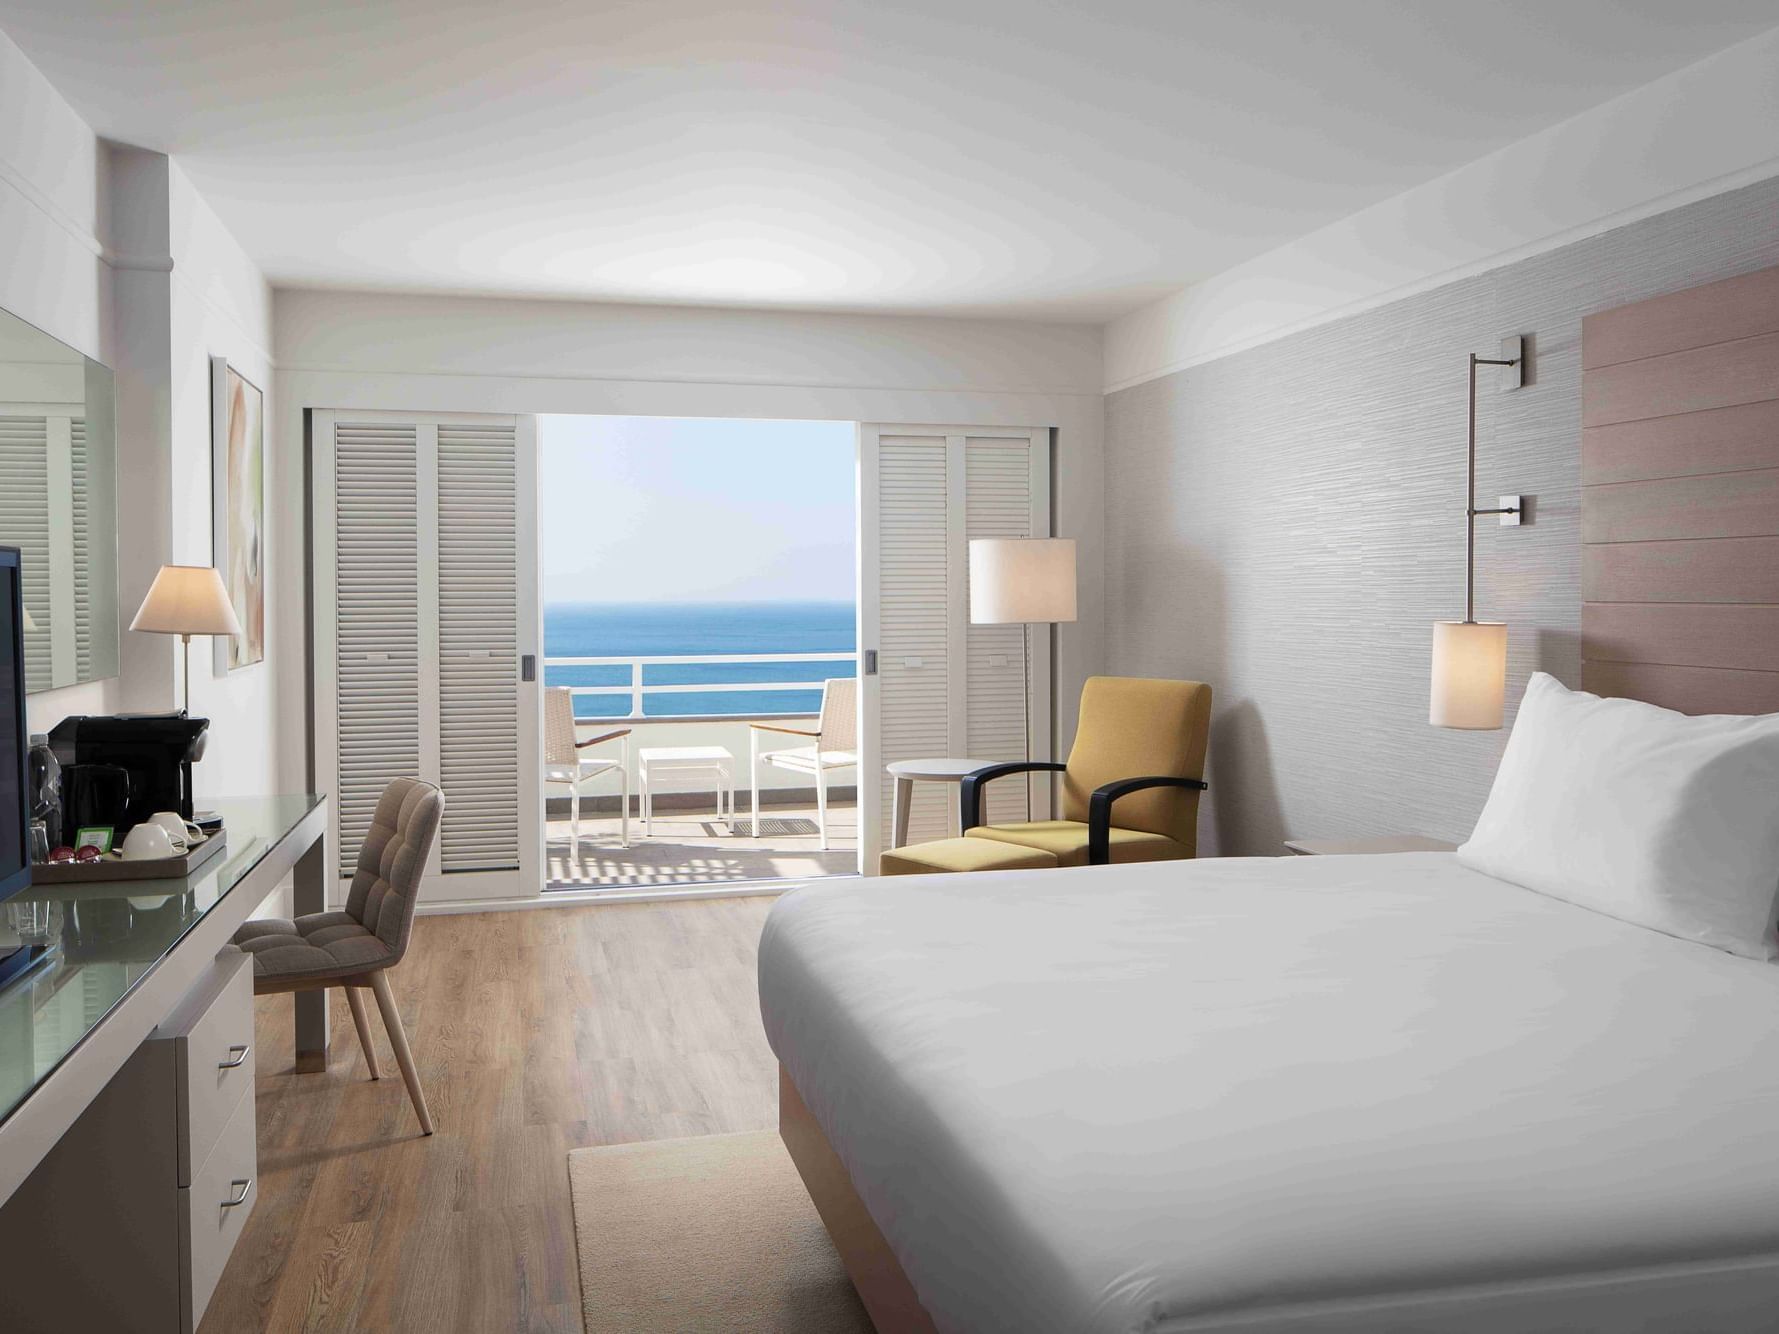 Bed & lounger with sea view in Deluxe Room, Doria Hotel Bodrum